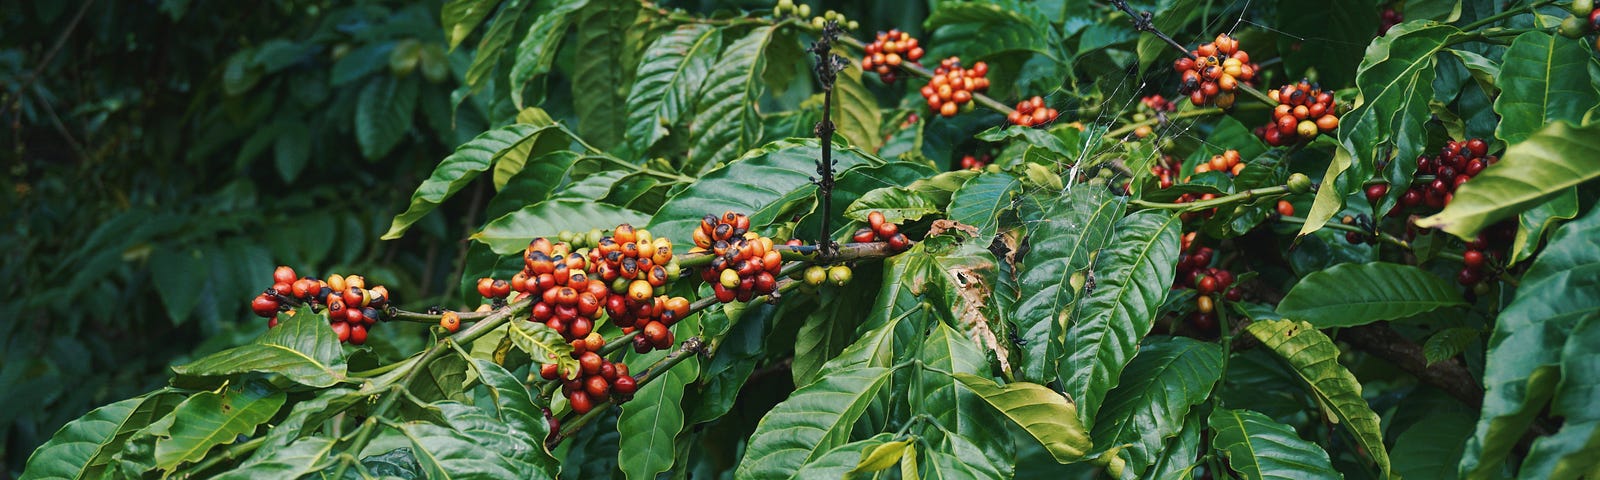 Coffee “cherries” growing on the plant